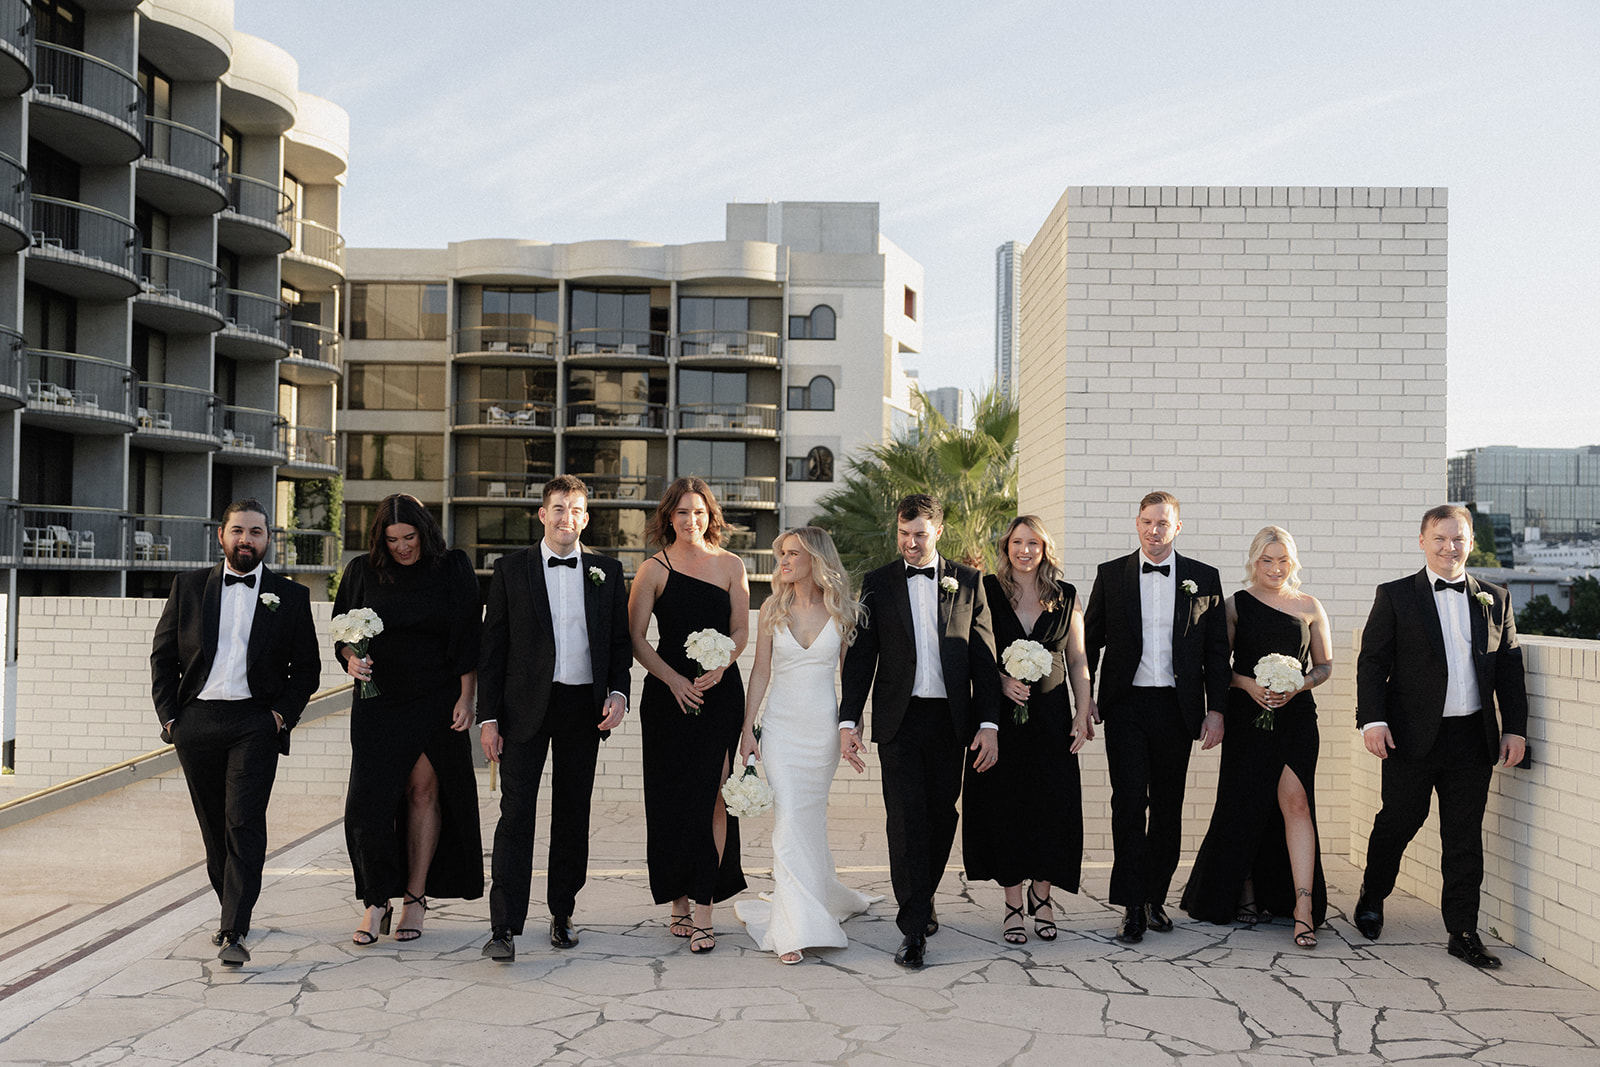 A sophisticated Black bridal party at The Calile Hotel amphitheatre for wedding photos